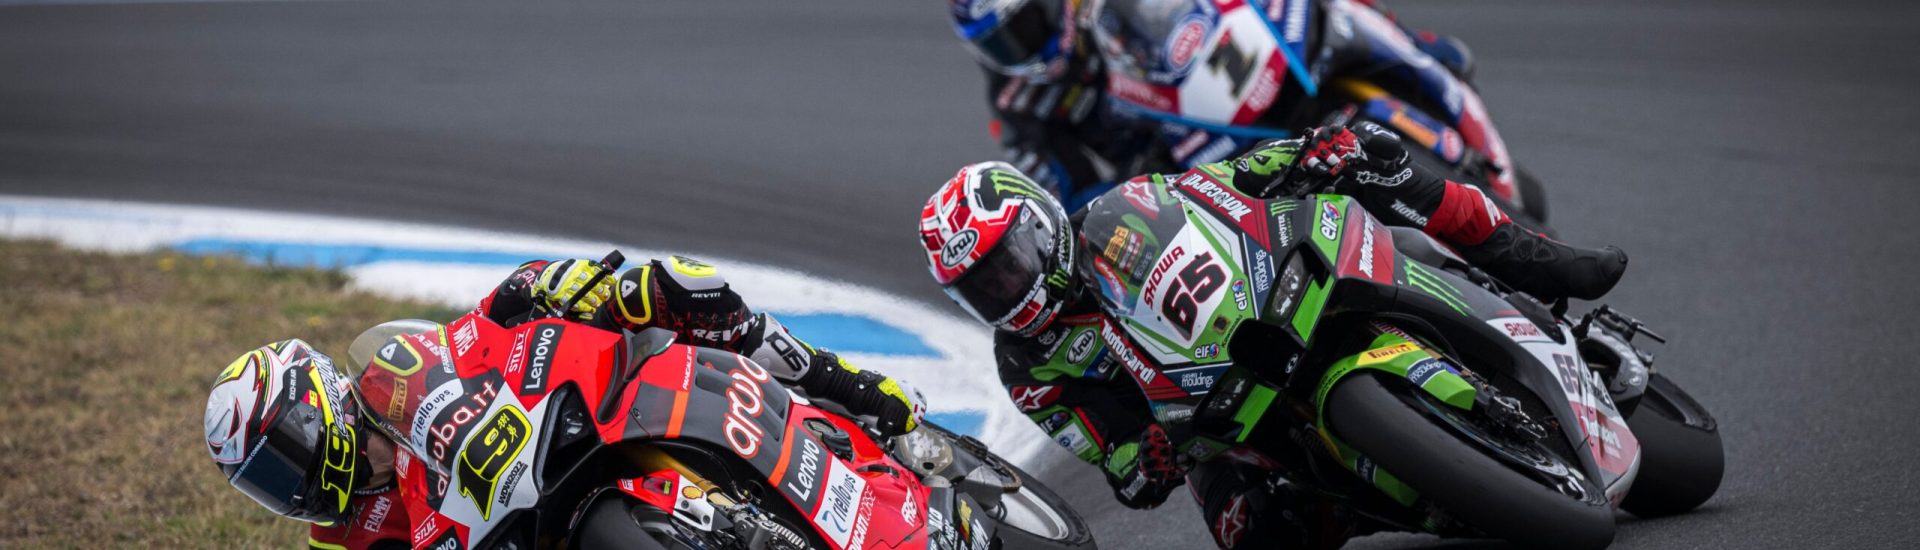 SBK World Championship returns to Estoril from 11th to 13th October